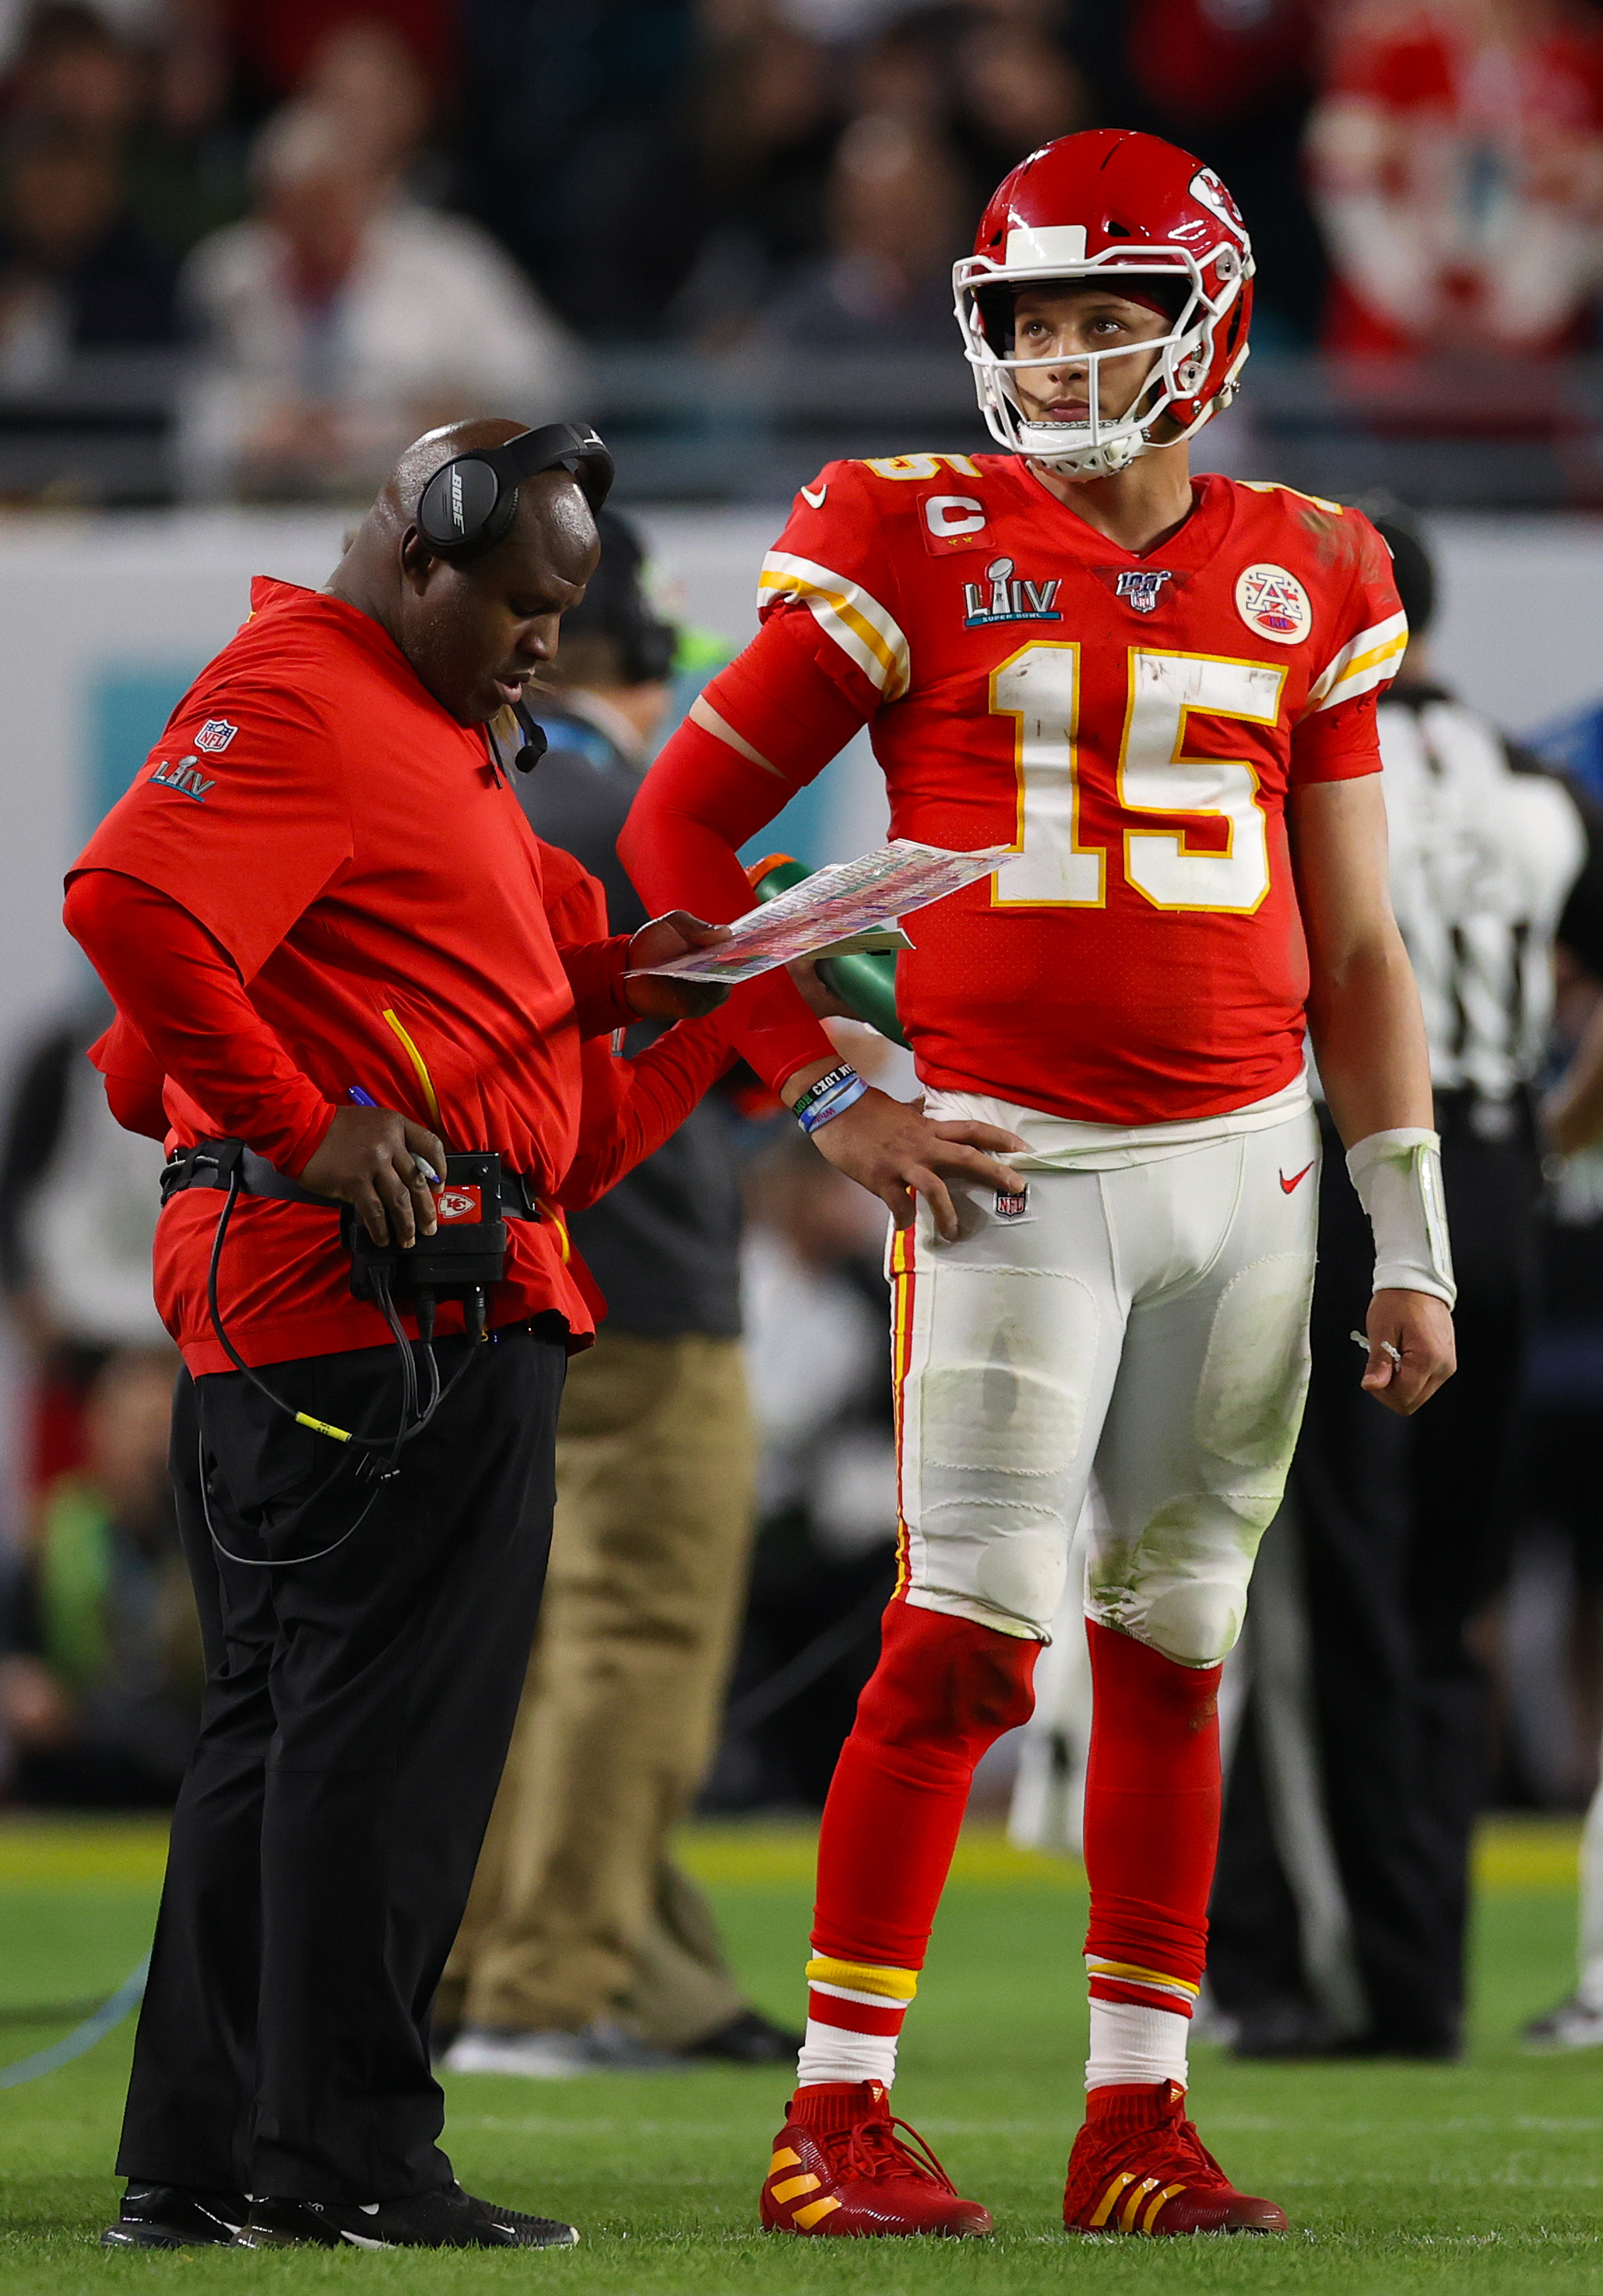 Chiefs OC Eric Bieniemy: HC Opportunity Is 'Going To Happen' At 'Right Time'